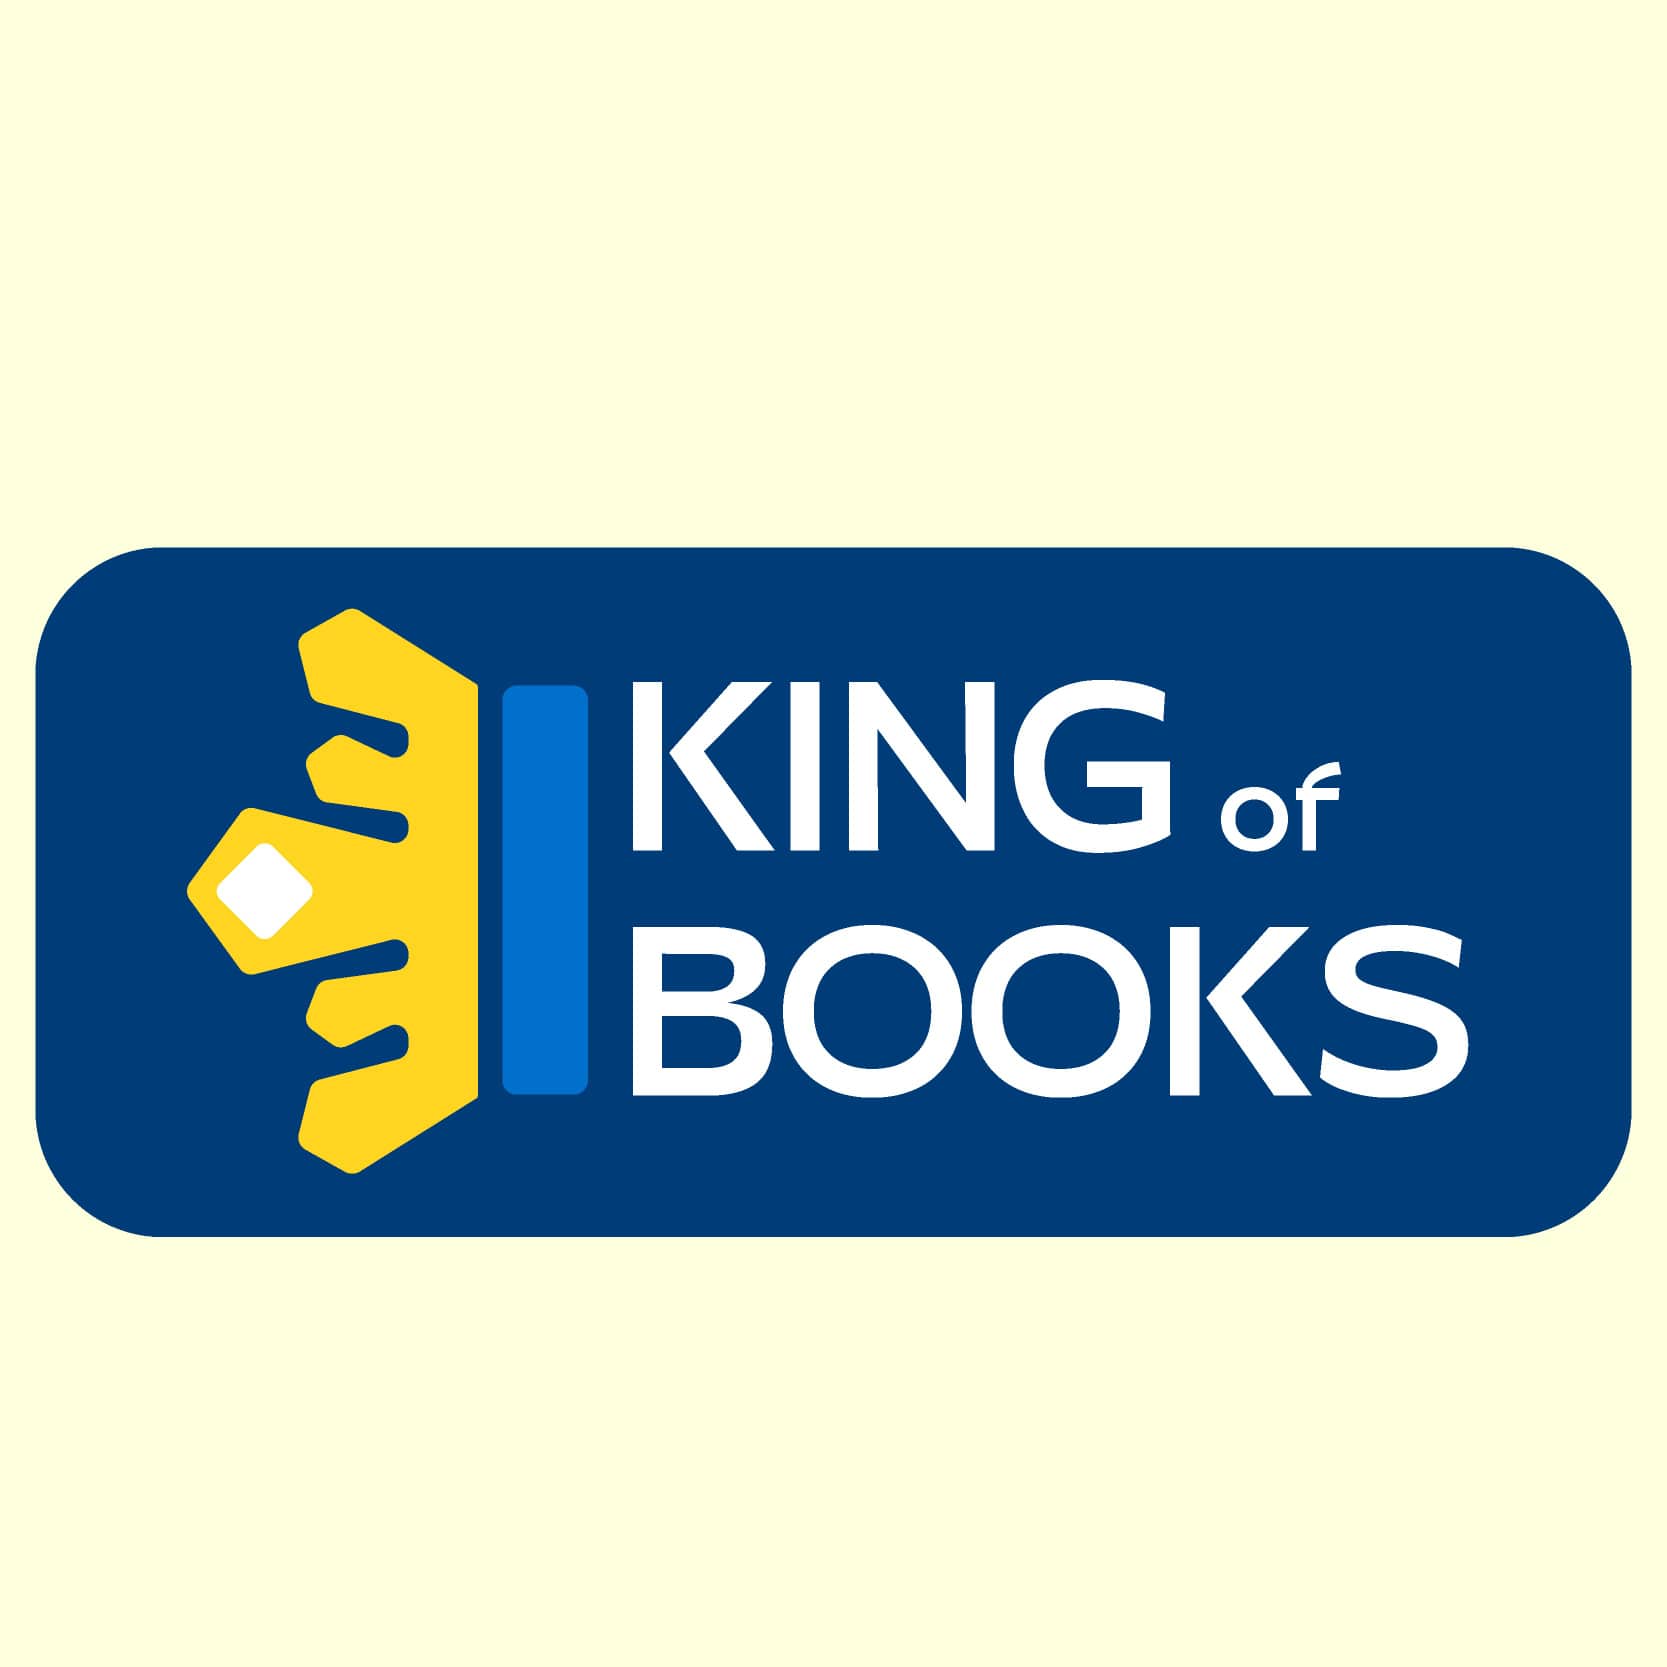 The King of Books